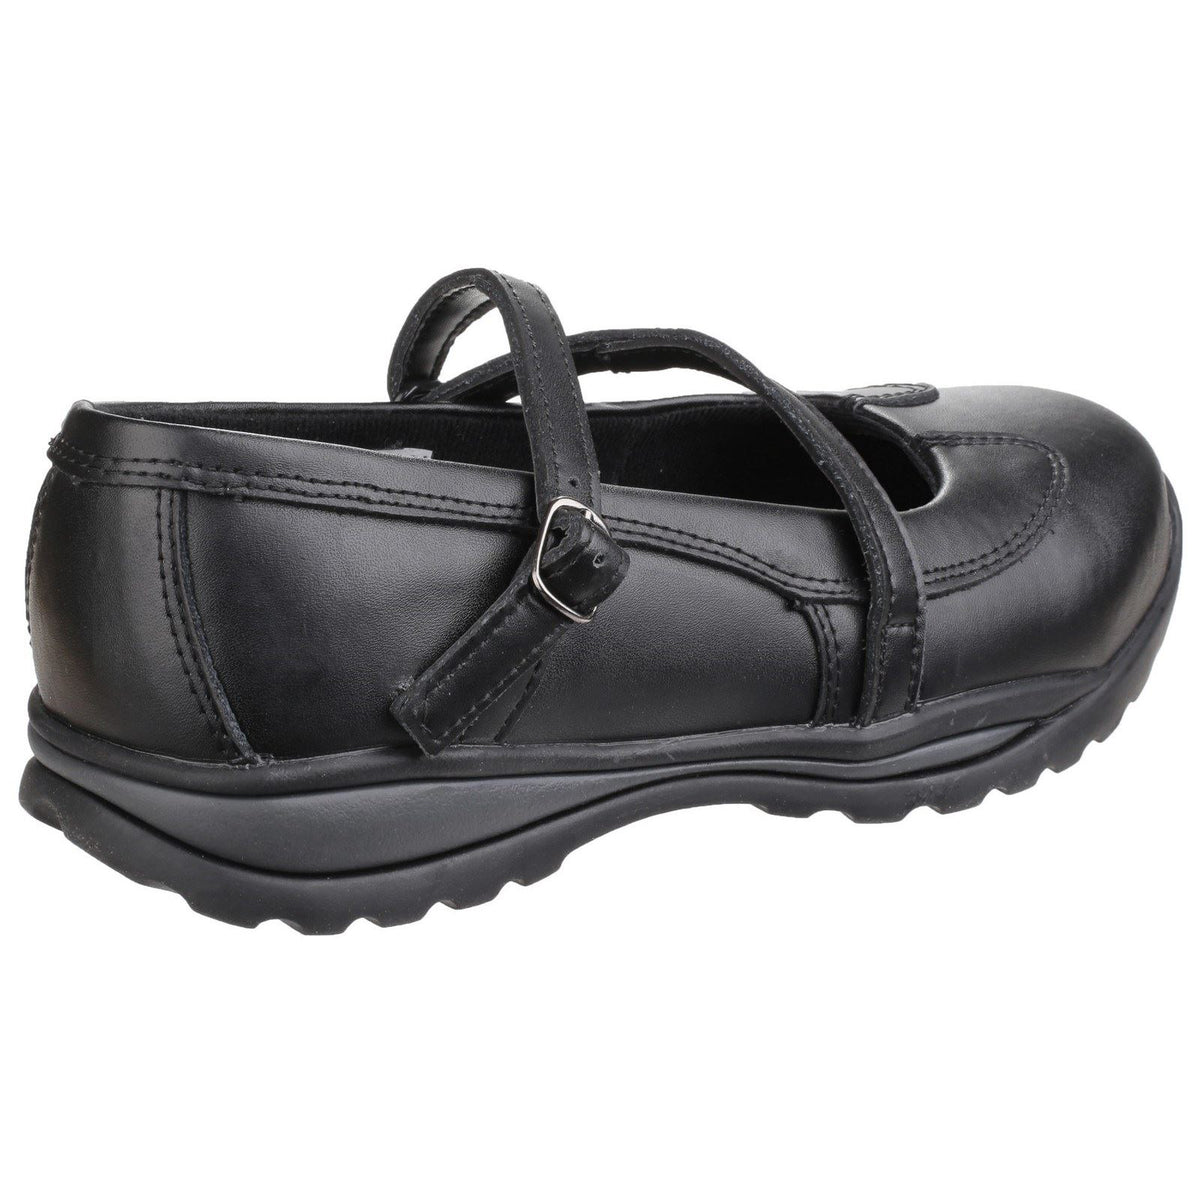 Amblers Safety FS55 Women's Safety Shoes